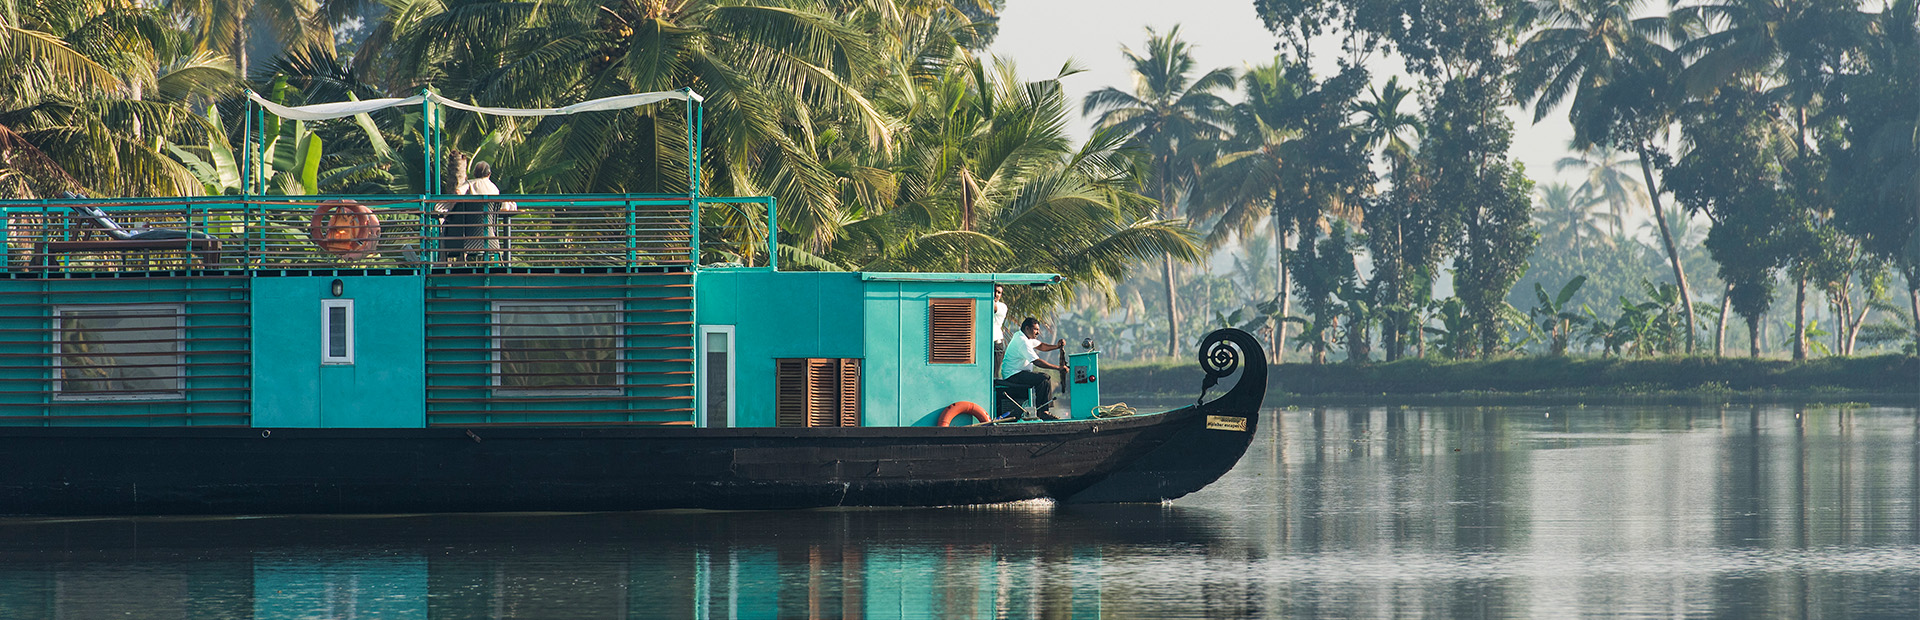 Discovery houseboat by Malabar Escapes